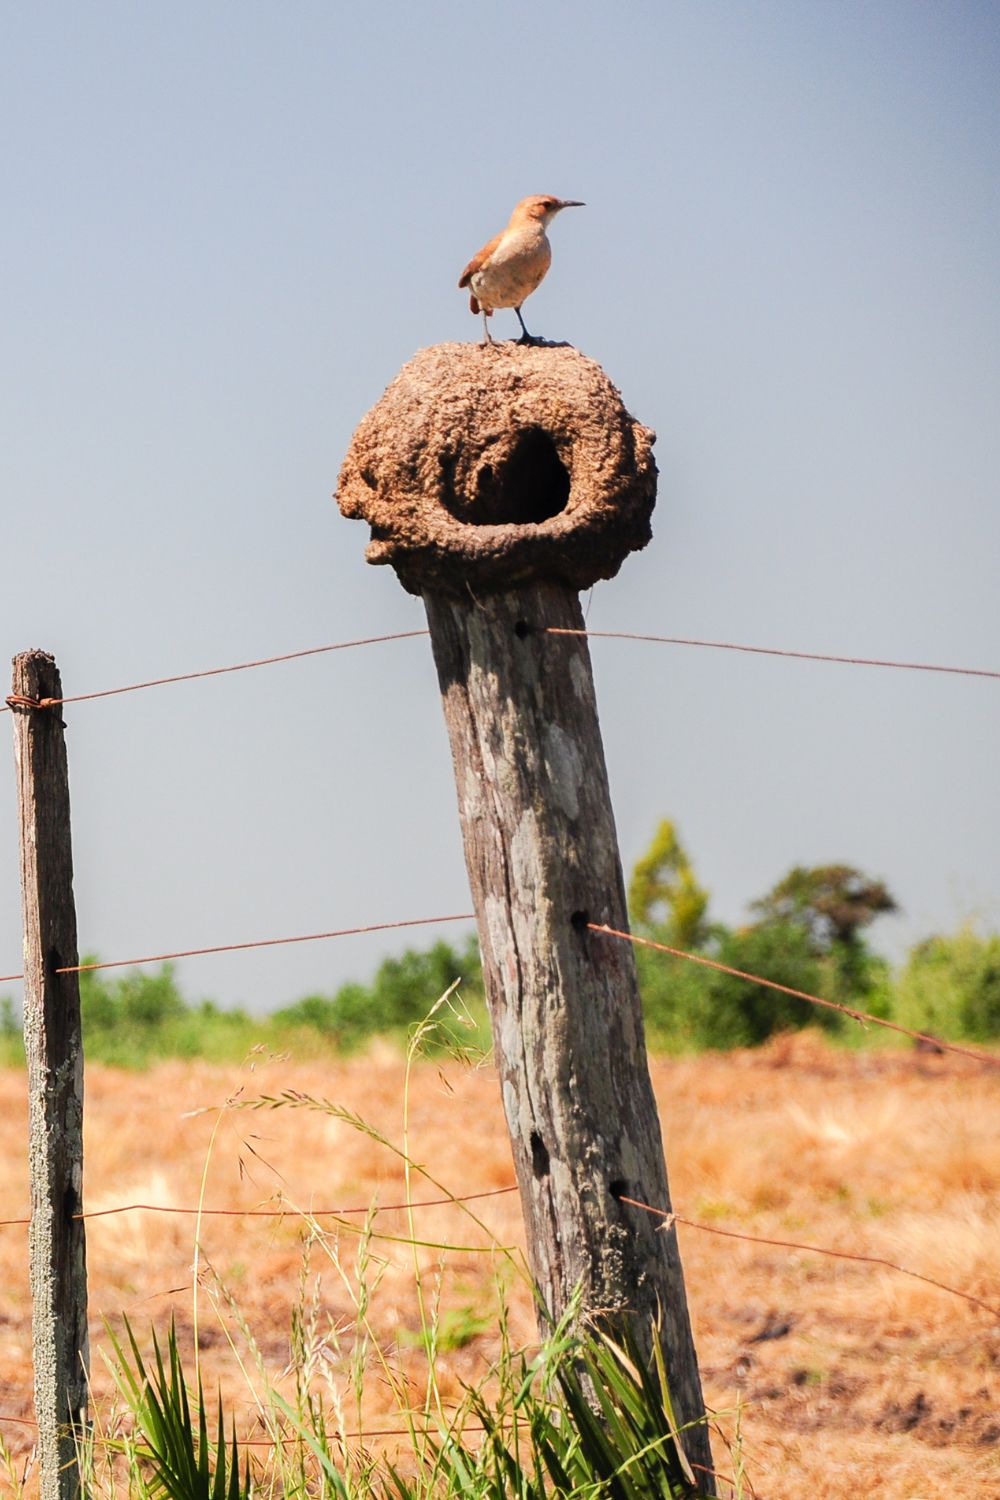 A Rufous Hornero (Furnarius rufus) standing over its nest on a wire fence